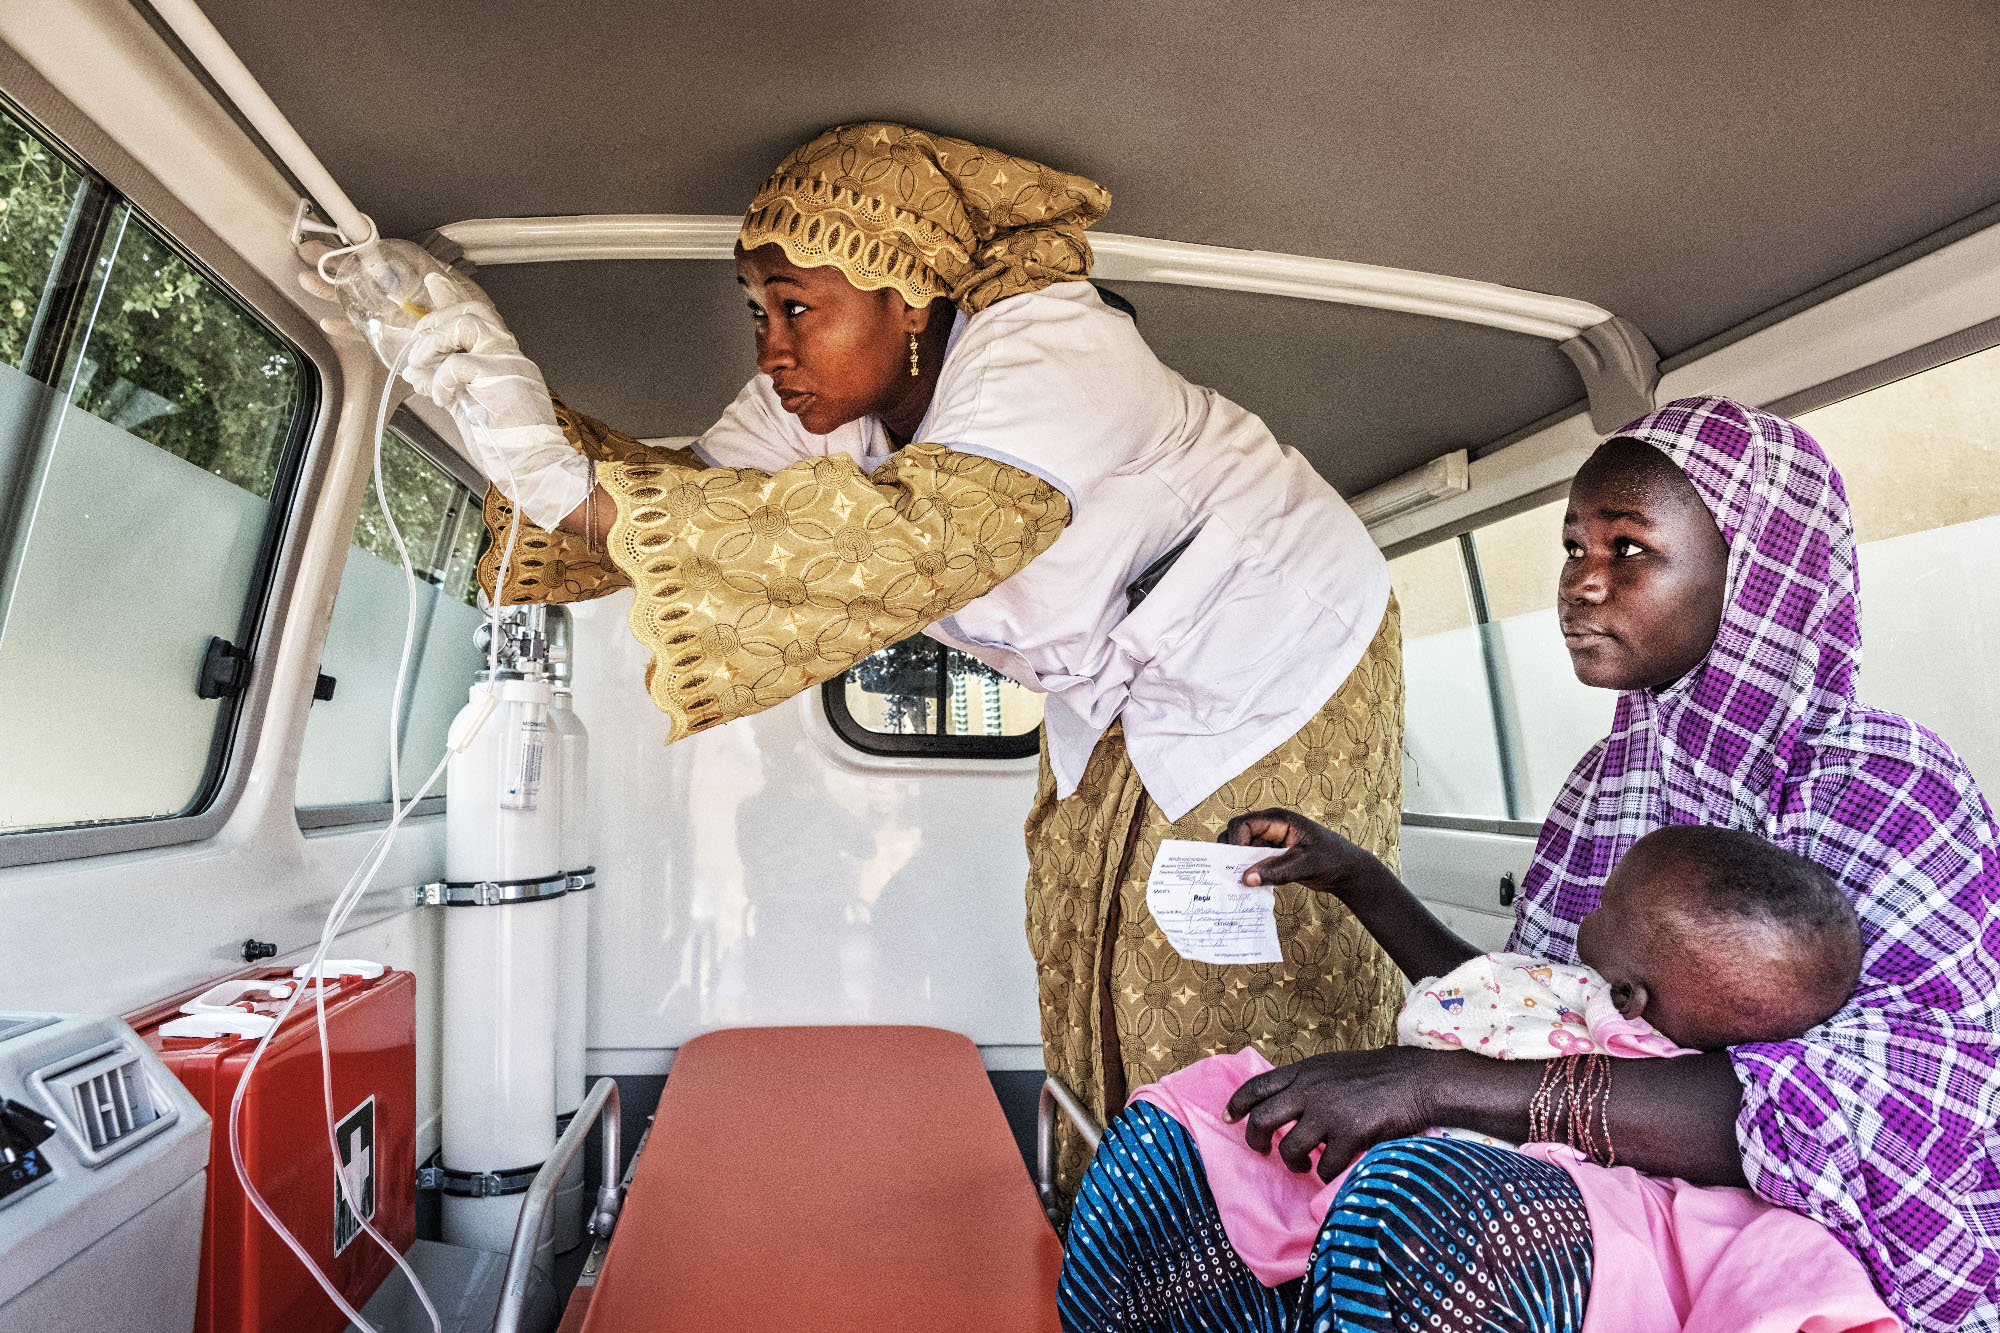 Health worker checking medical supplies in an ambulance while female patient with infant awaits.